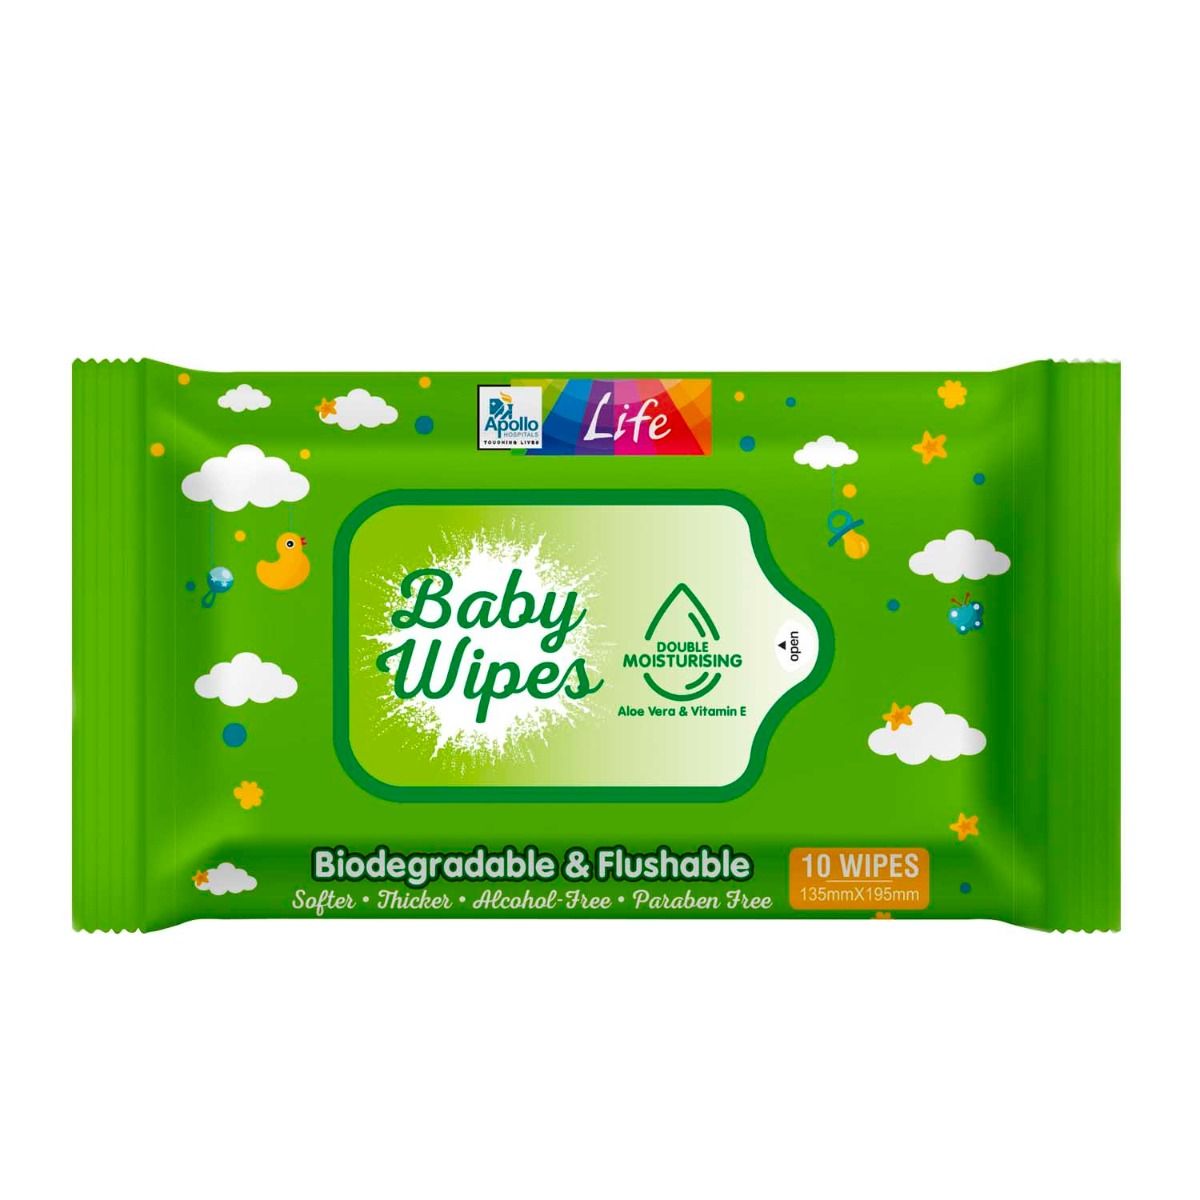 Apollo Pharmacy Biodegradable & Flushable Baby Wipes, 10 Count, Pack of 1 